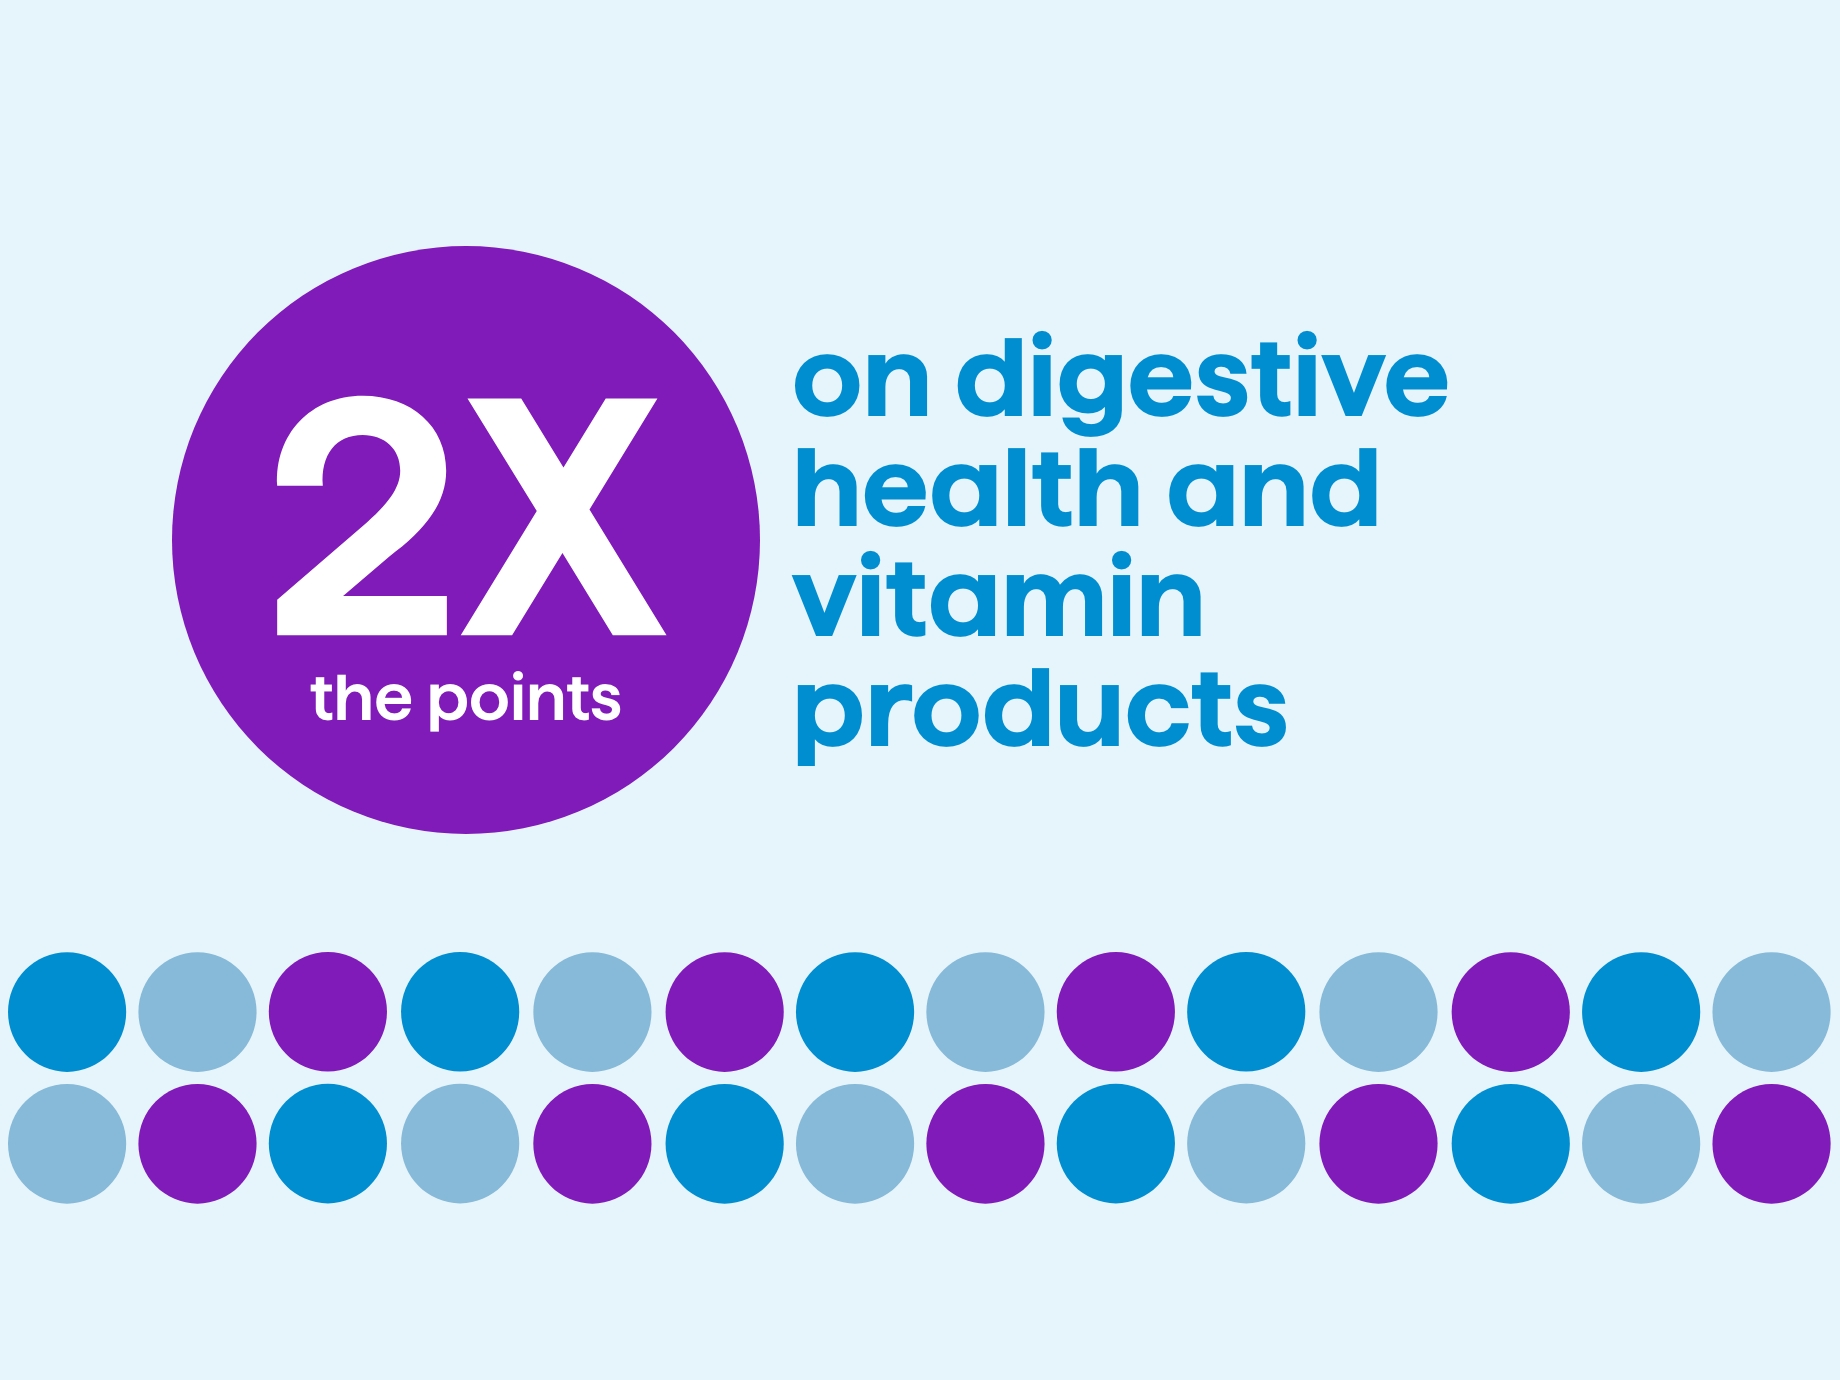 2x the points on digestive health and vitamin products